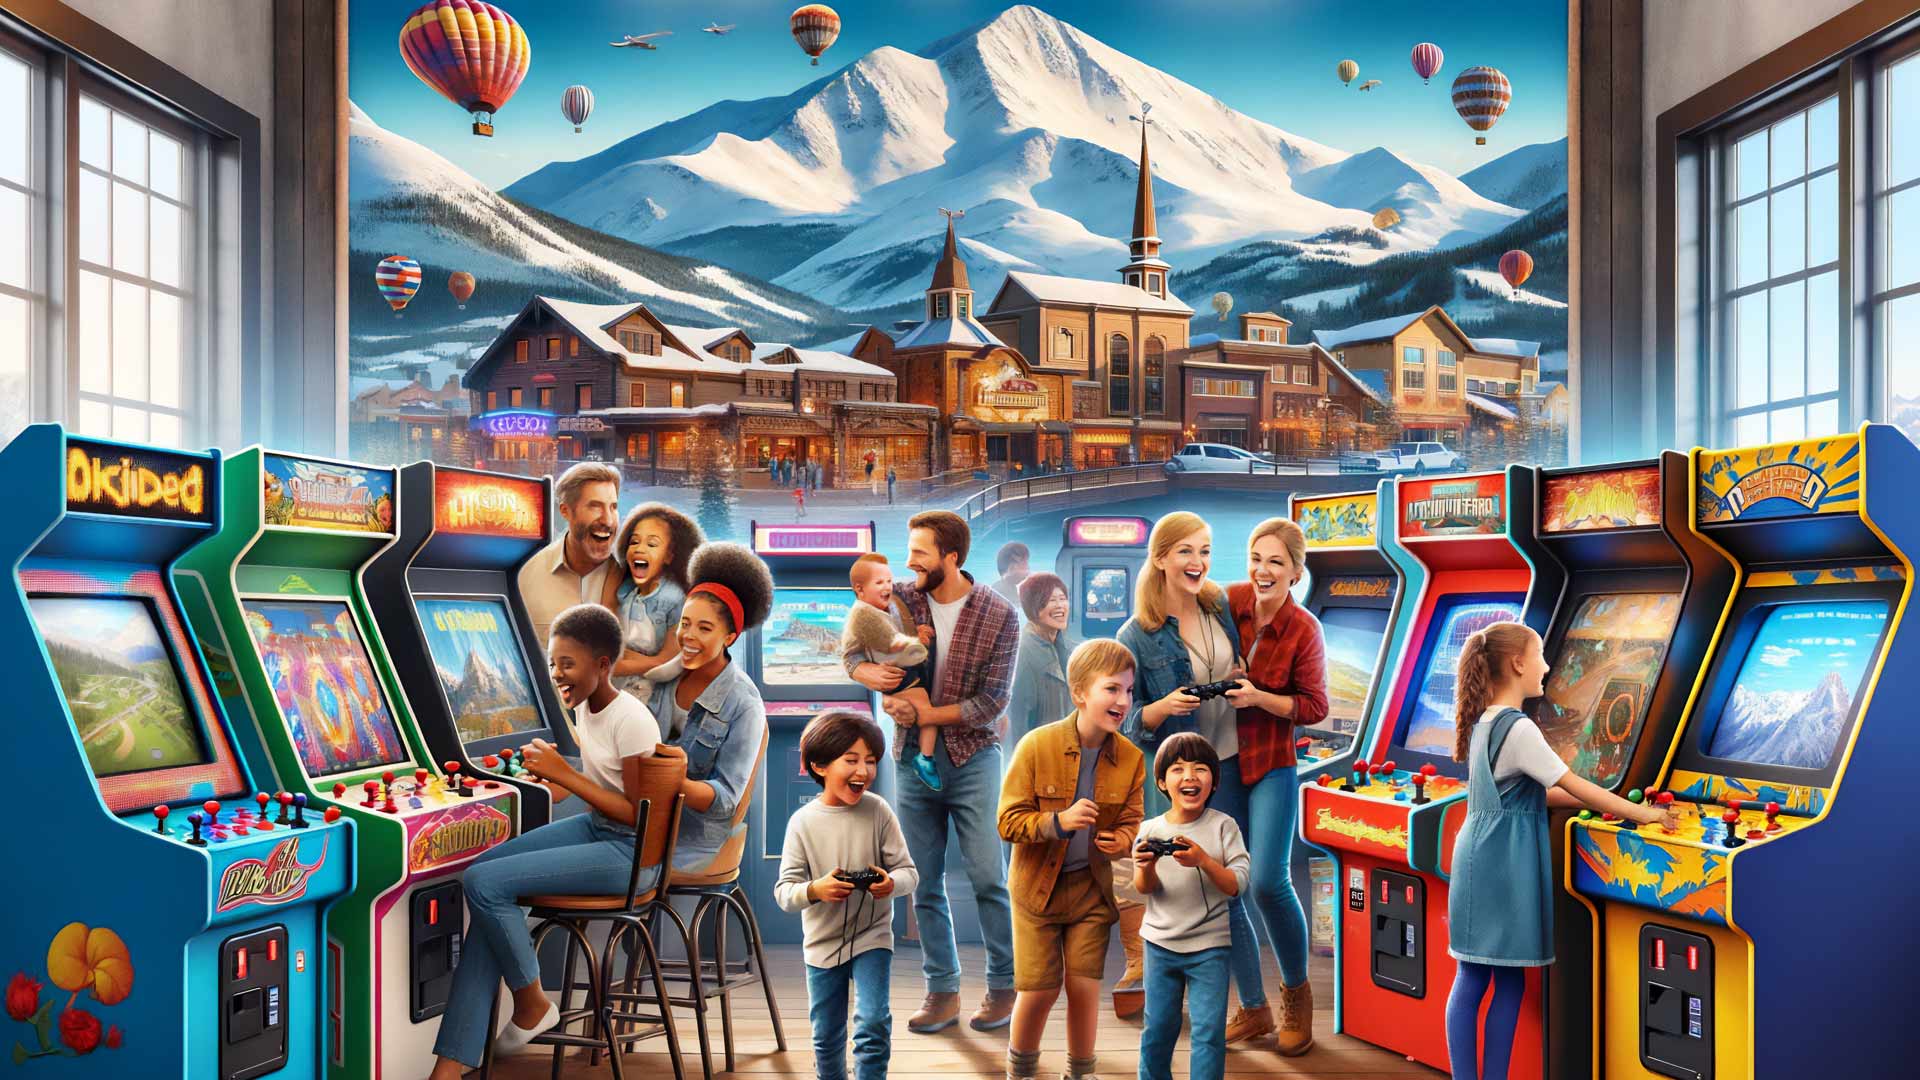 take your family out for an arcade fun in breckenridge